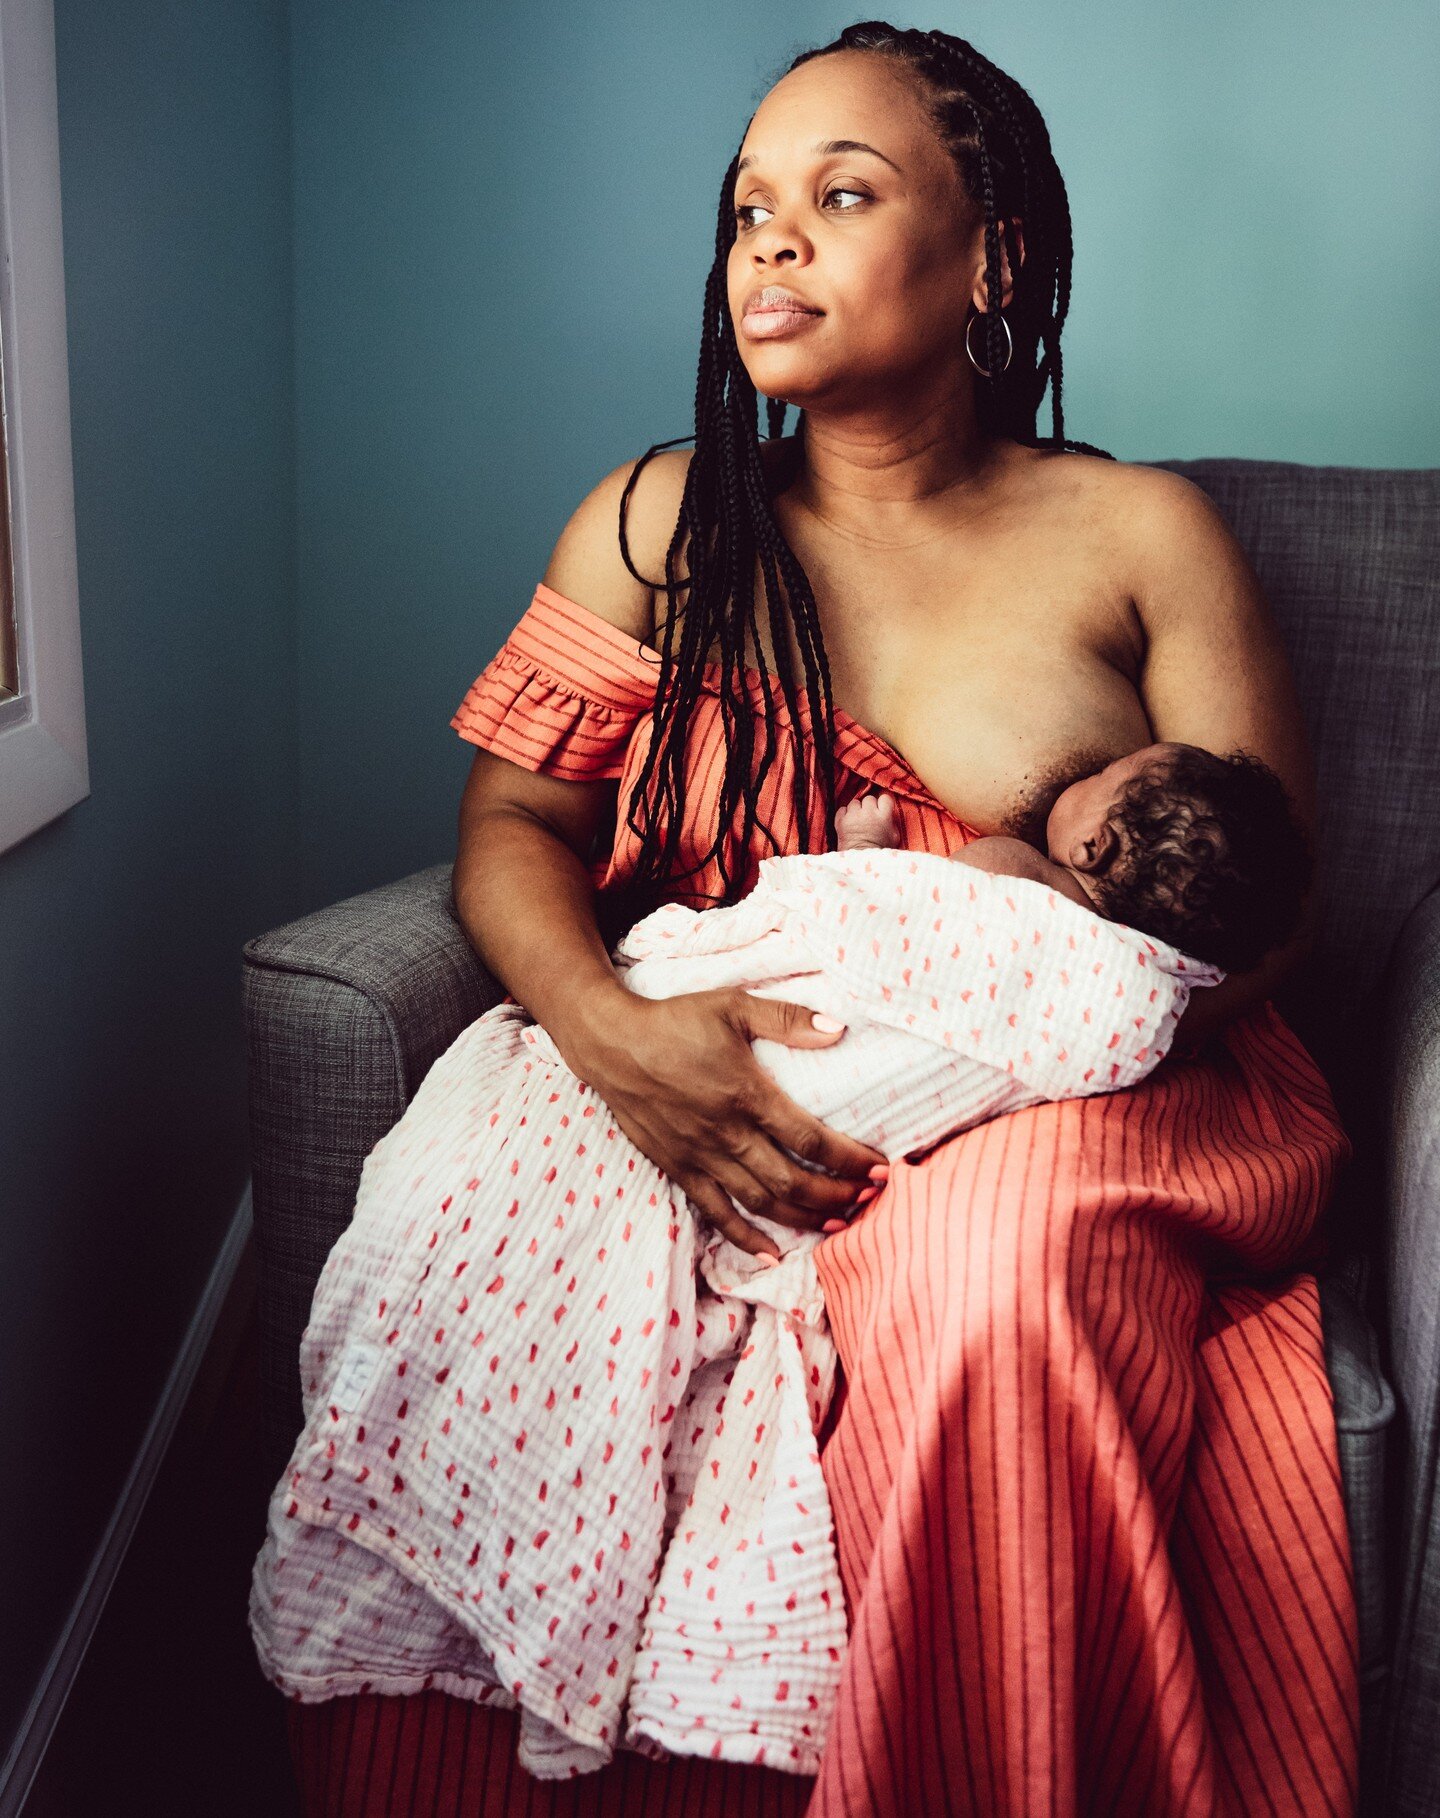 Any of you in the **really** early days postpartum? Where it seems like all you do is breastfeed (if that's what you're choosing to do?)? So. Many. Hours. But so worth it. Right? Even if you're not breastfeeding, all those hours spent nourishing anot